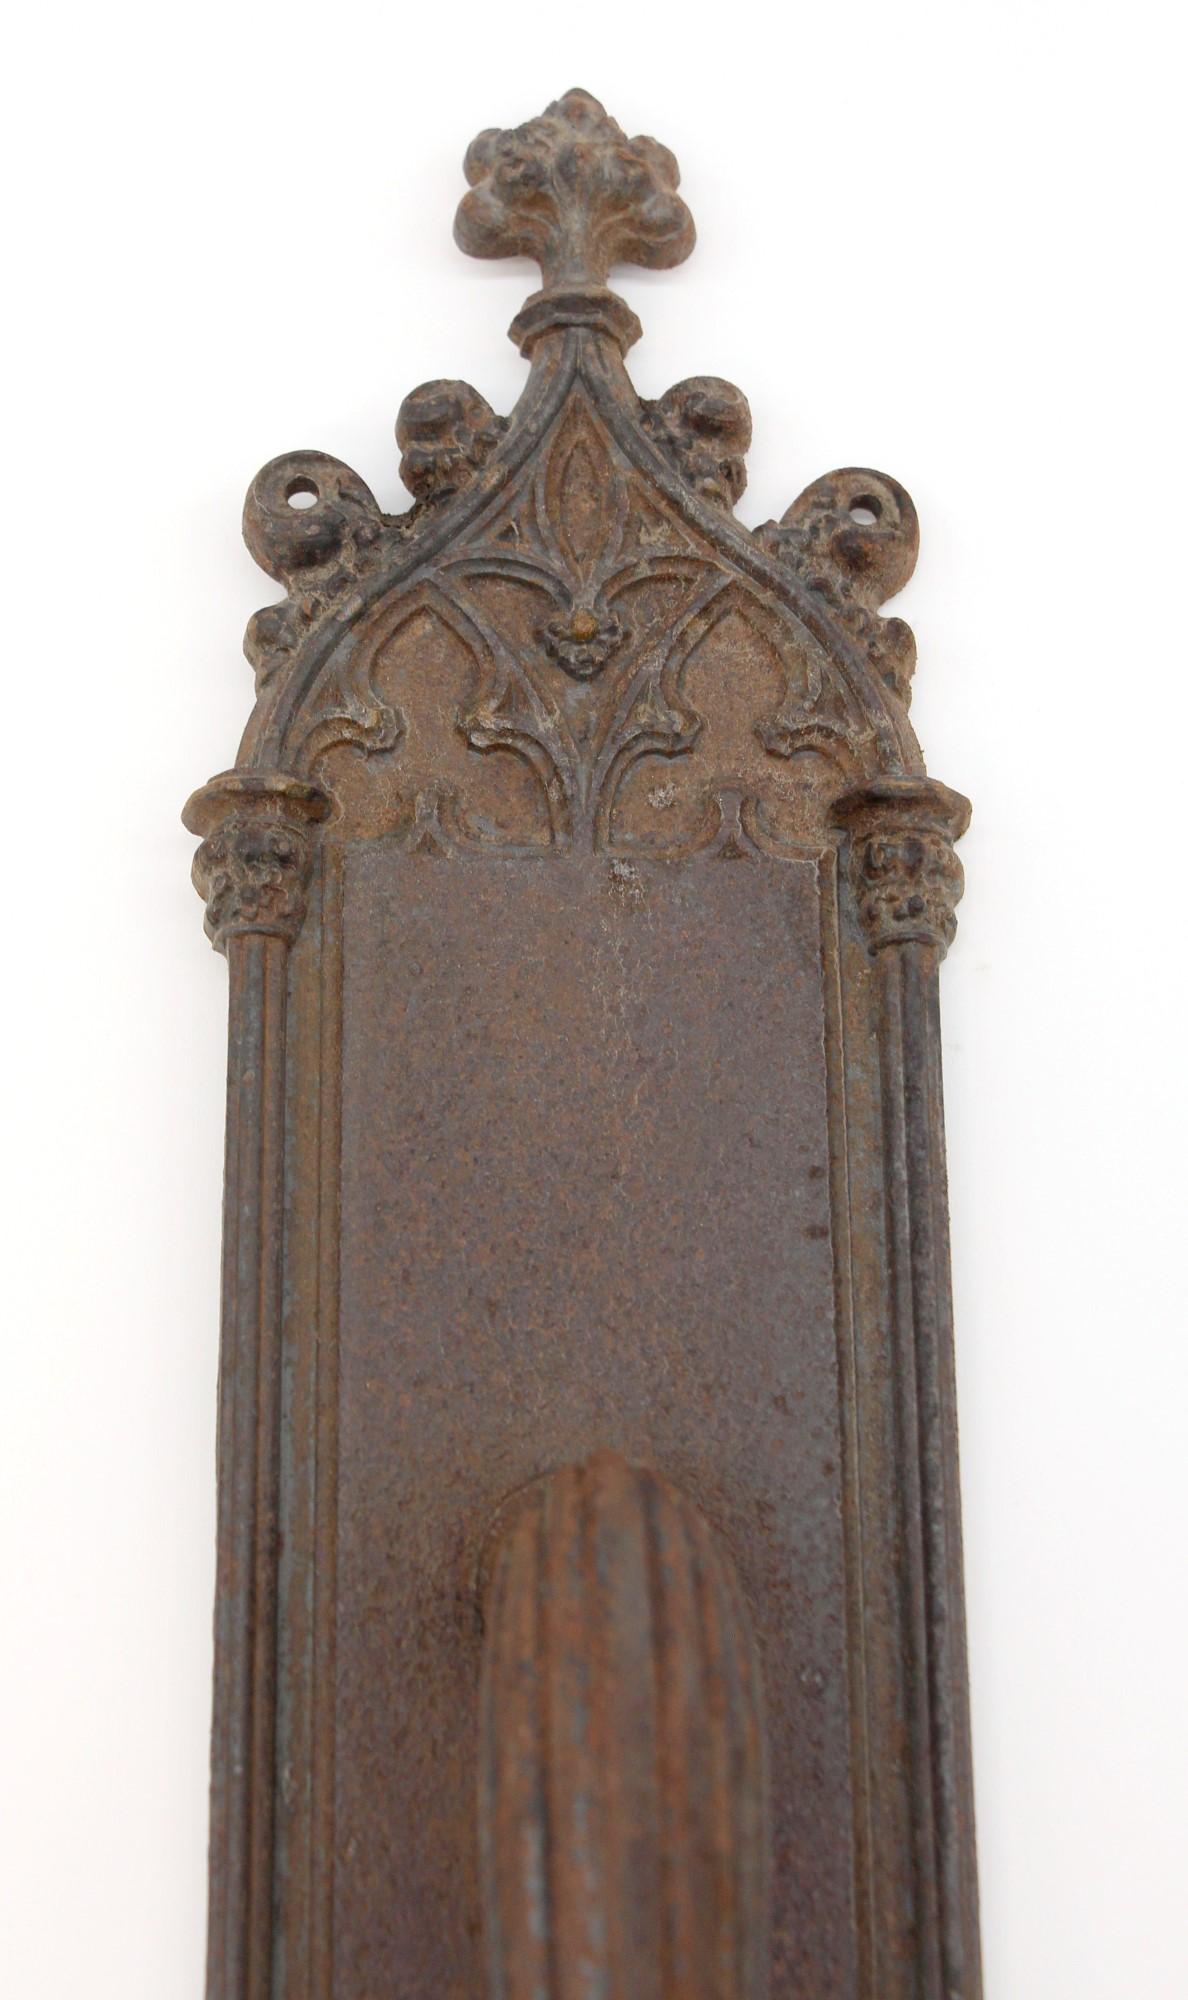 Antique Yale & Town Gothic oversized entry door pull in excellent condition. This cast iron handle is extra long & wide for large doors. Small quantity available at time of posting. Priced each. Please inquire. Please note, this item is located in